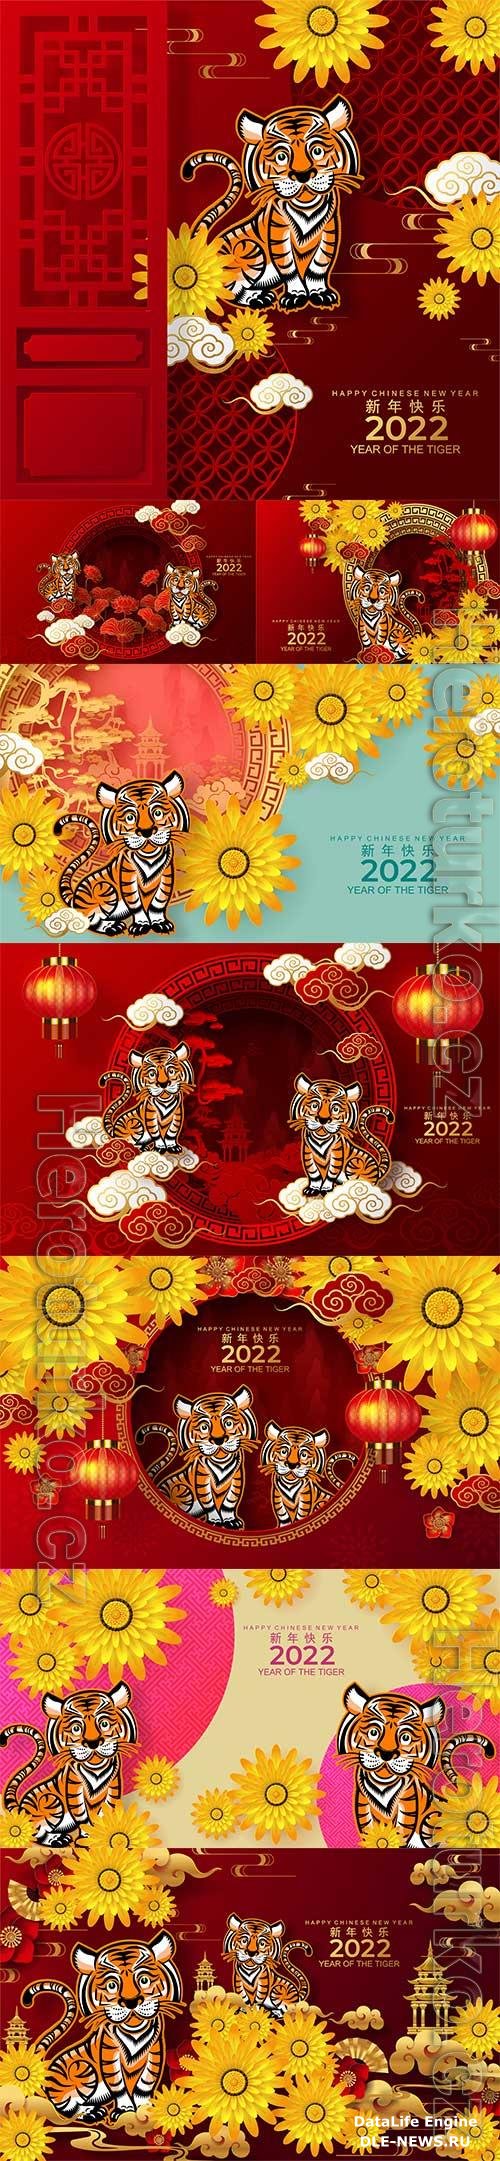 Chinese new year 2022 year of the tiger in vector